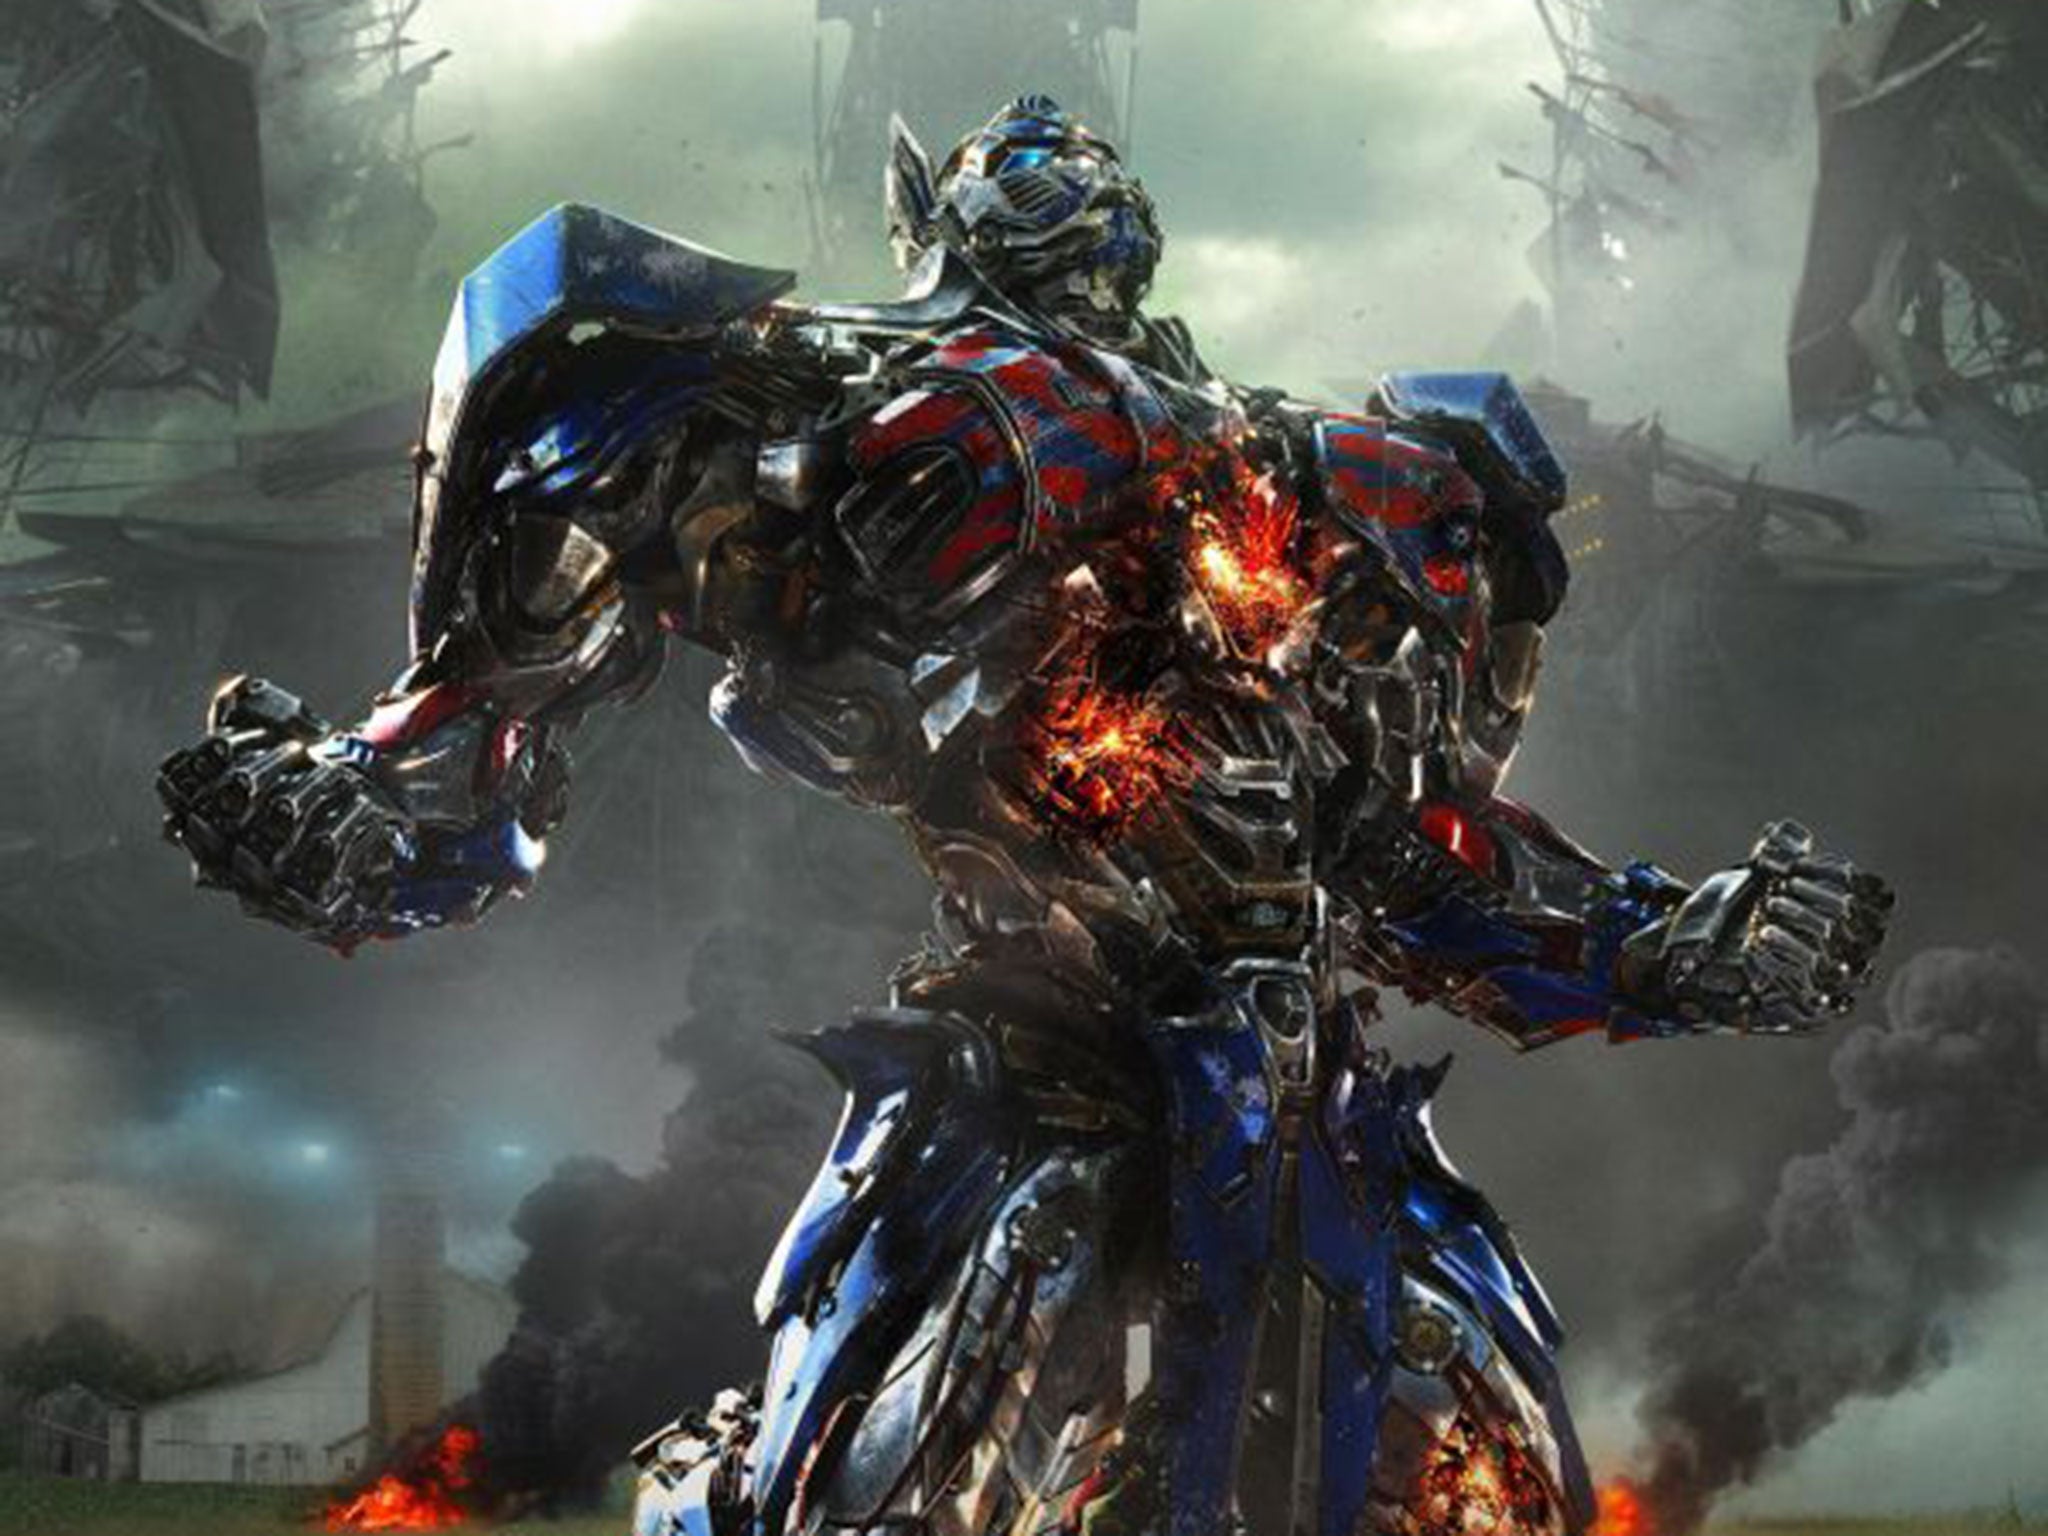 Transformers 4 was the most searched for movie in the UK in 2014